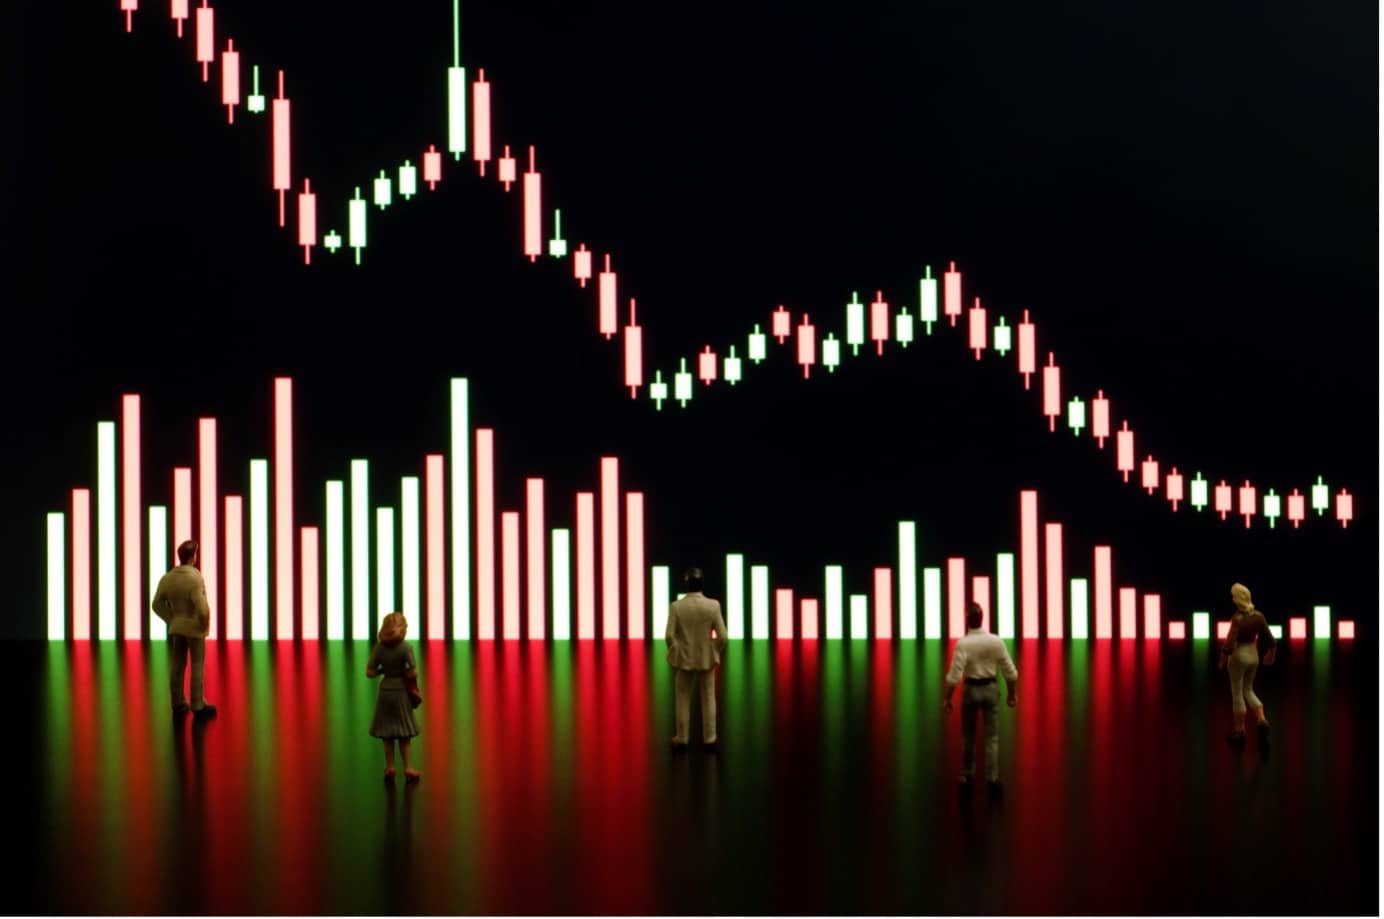 How to trade the doji pattern in forex